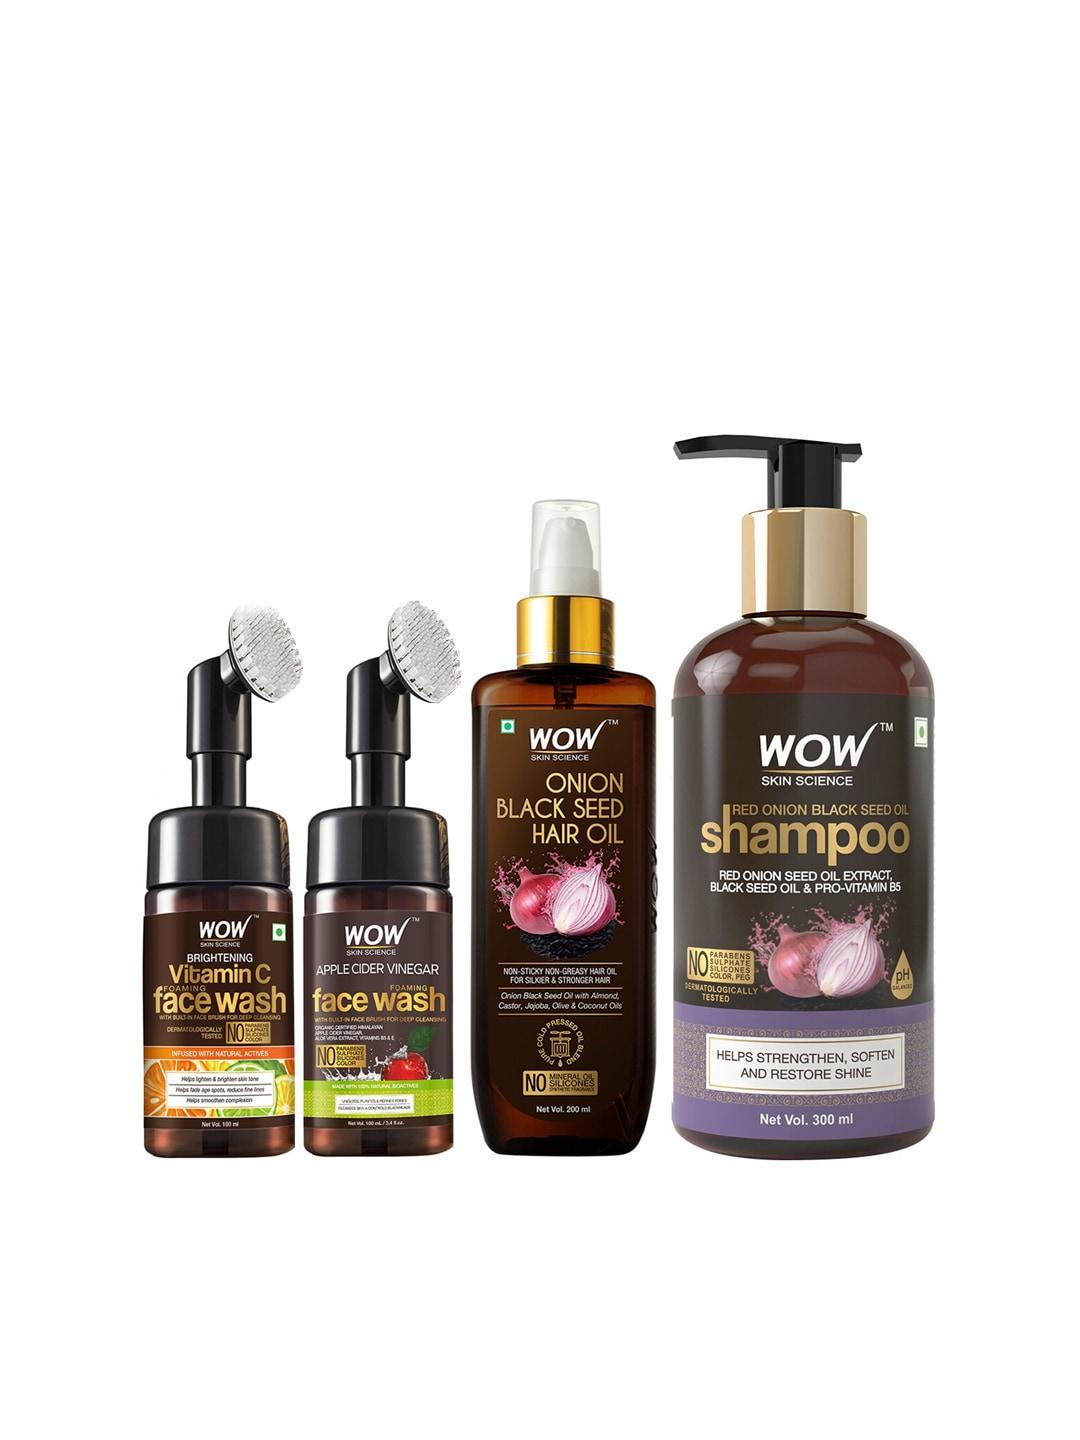 WOW SKIN SCIENCE Set of Hair Oil - Shampoo & 2 Face Wash